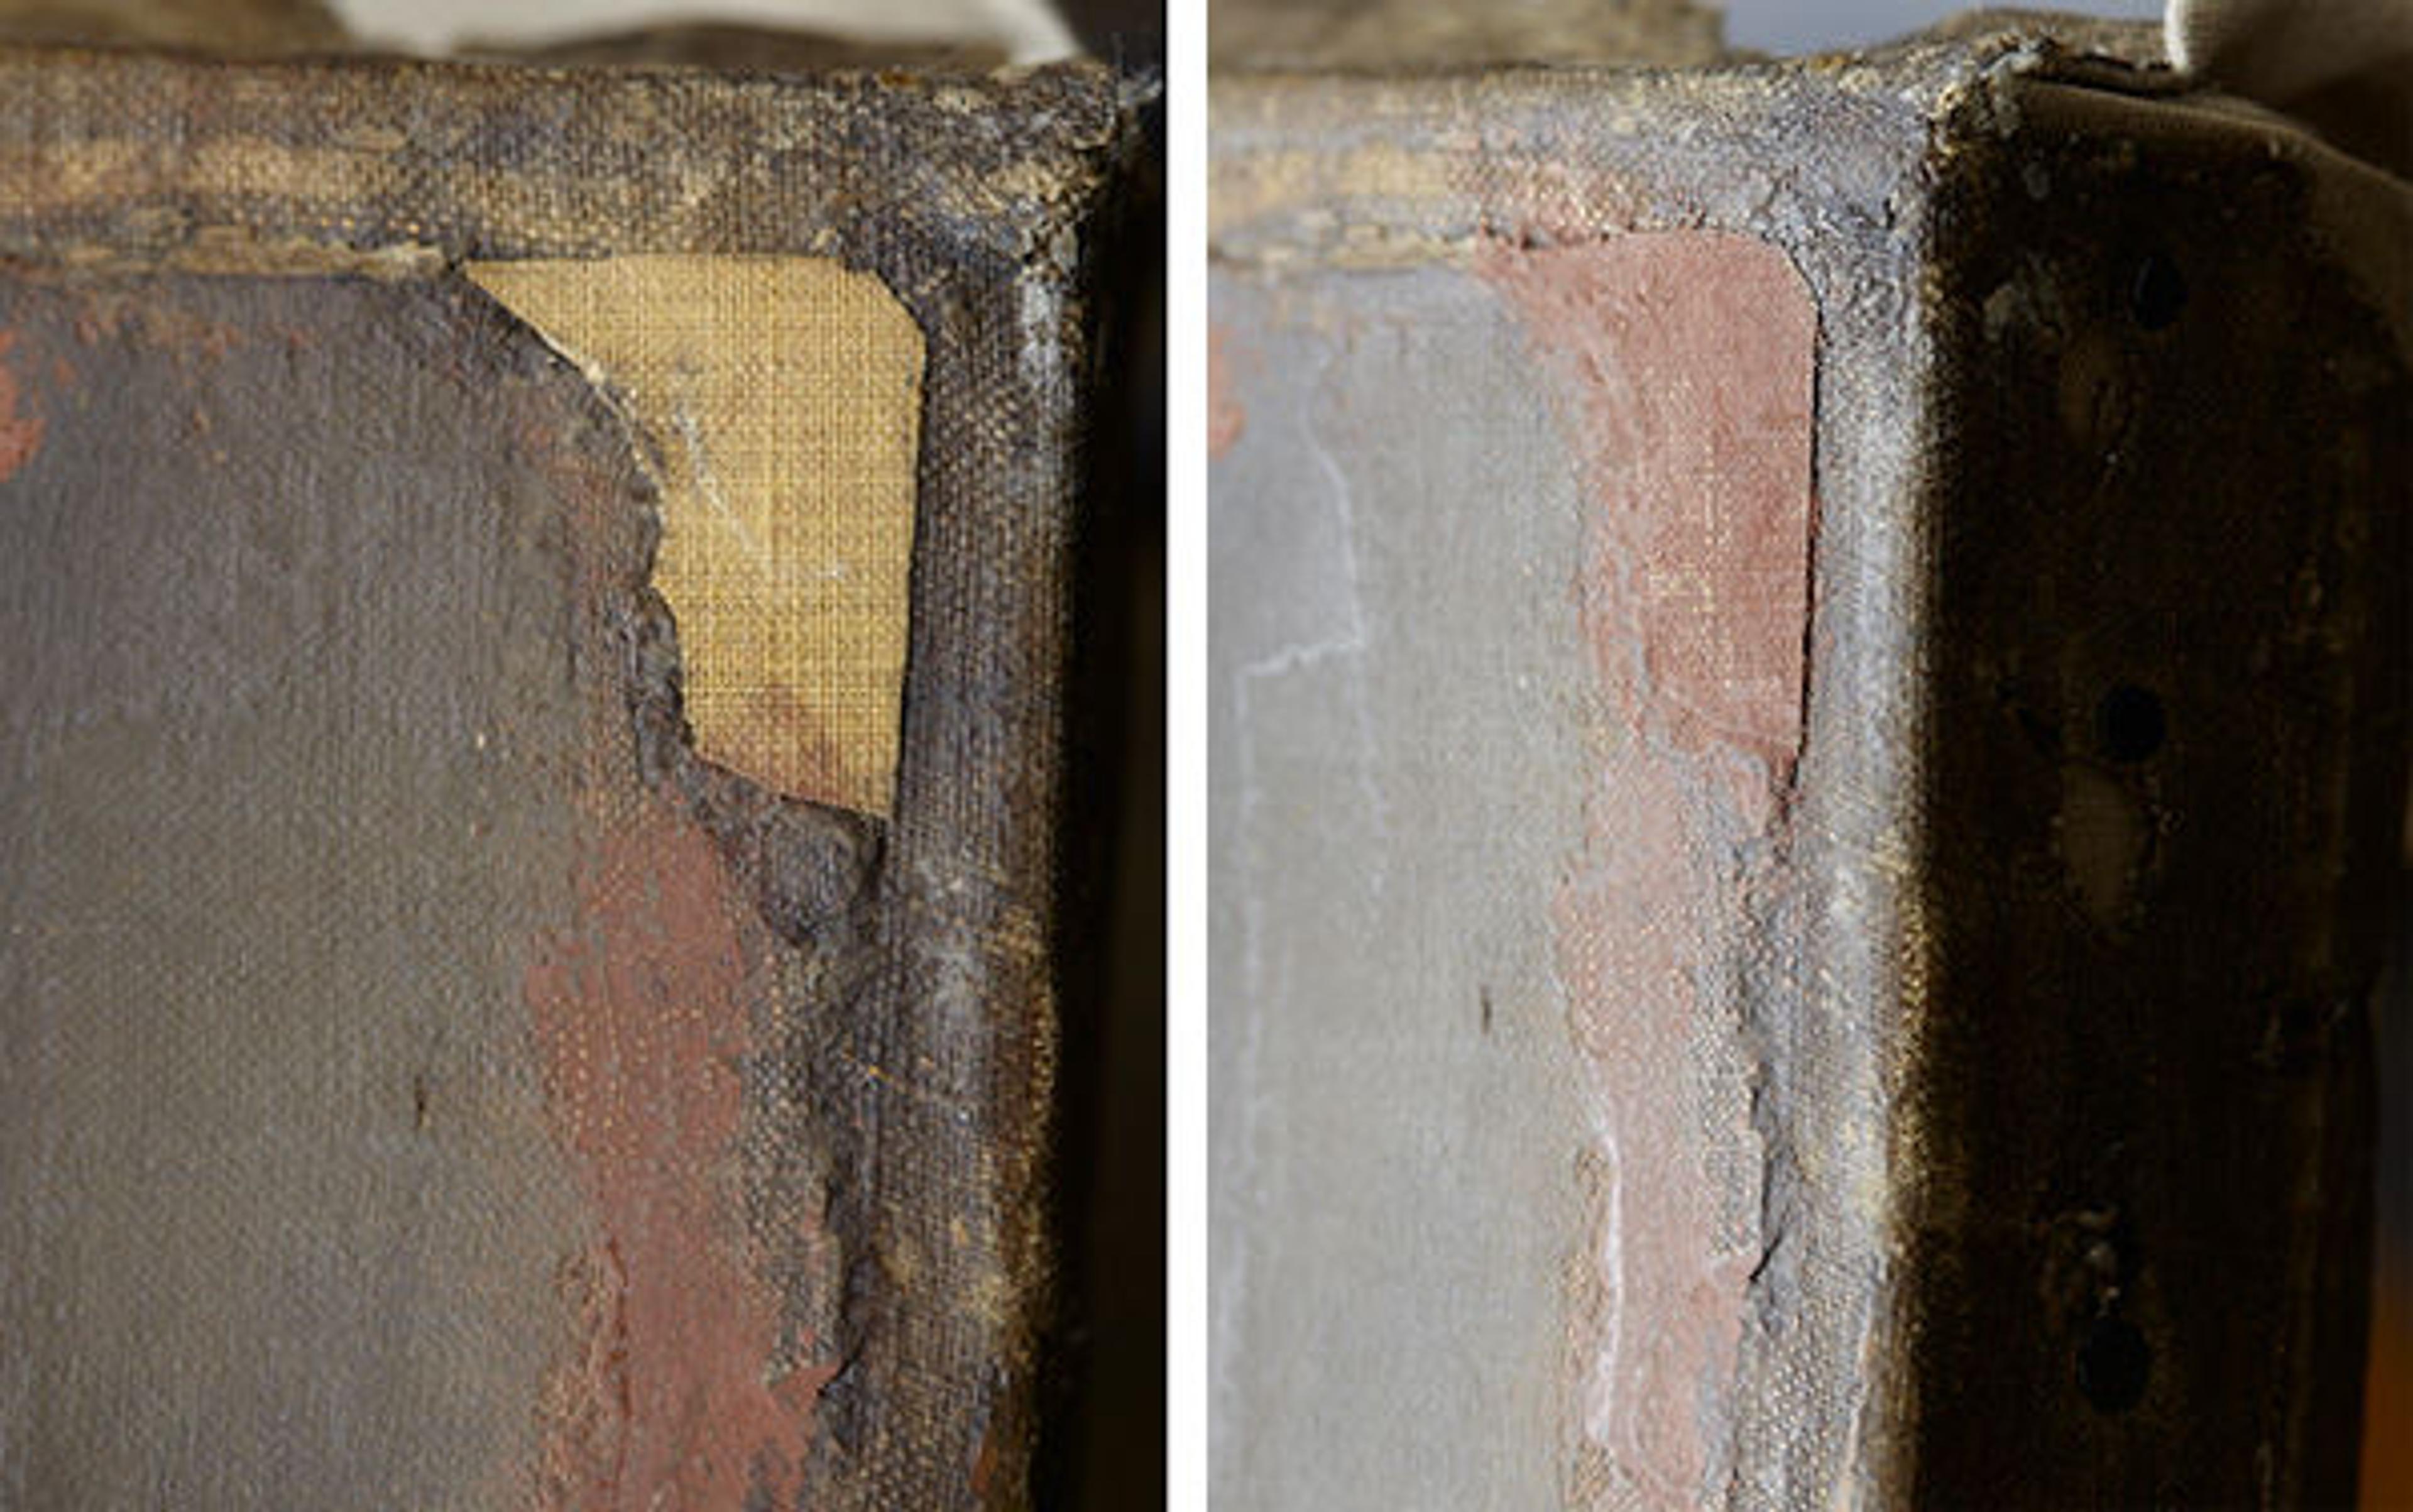 Left: A canvas inset is attached where the original portion is missing. Right: Seen at a more raking angle after filling